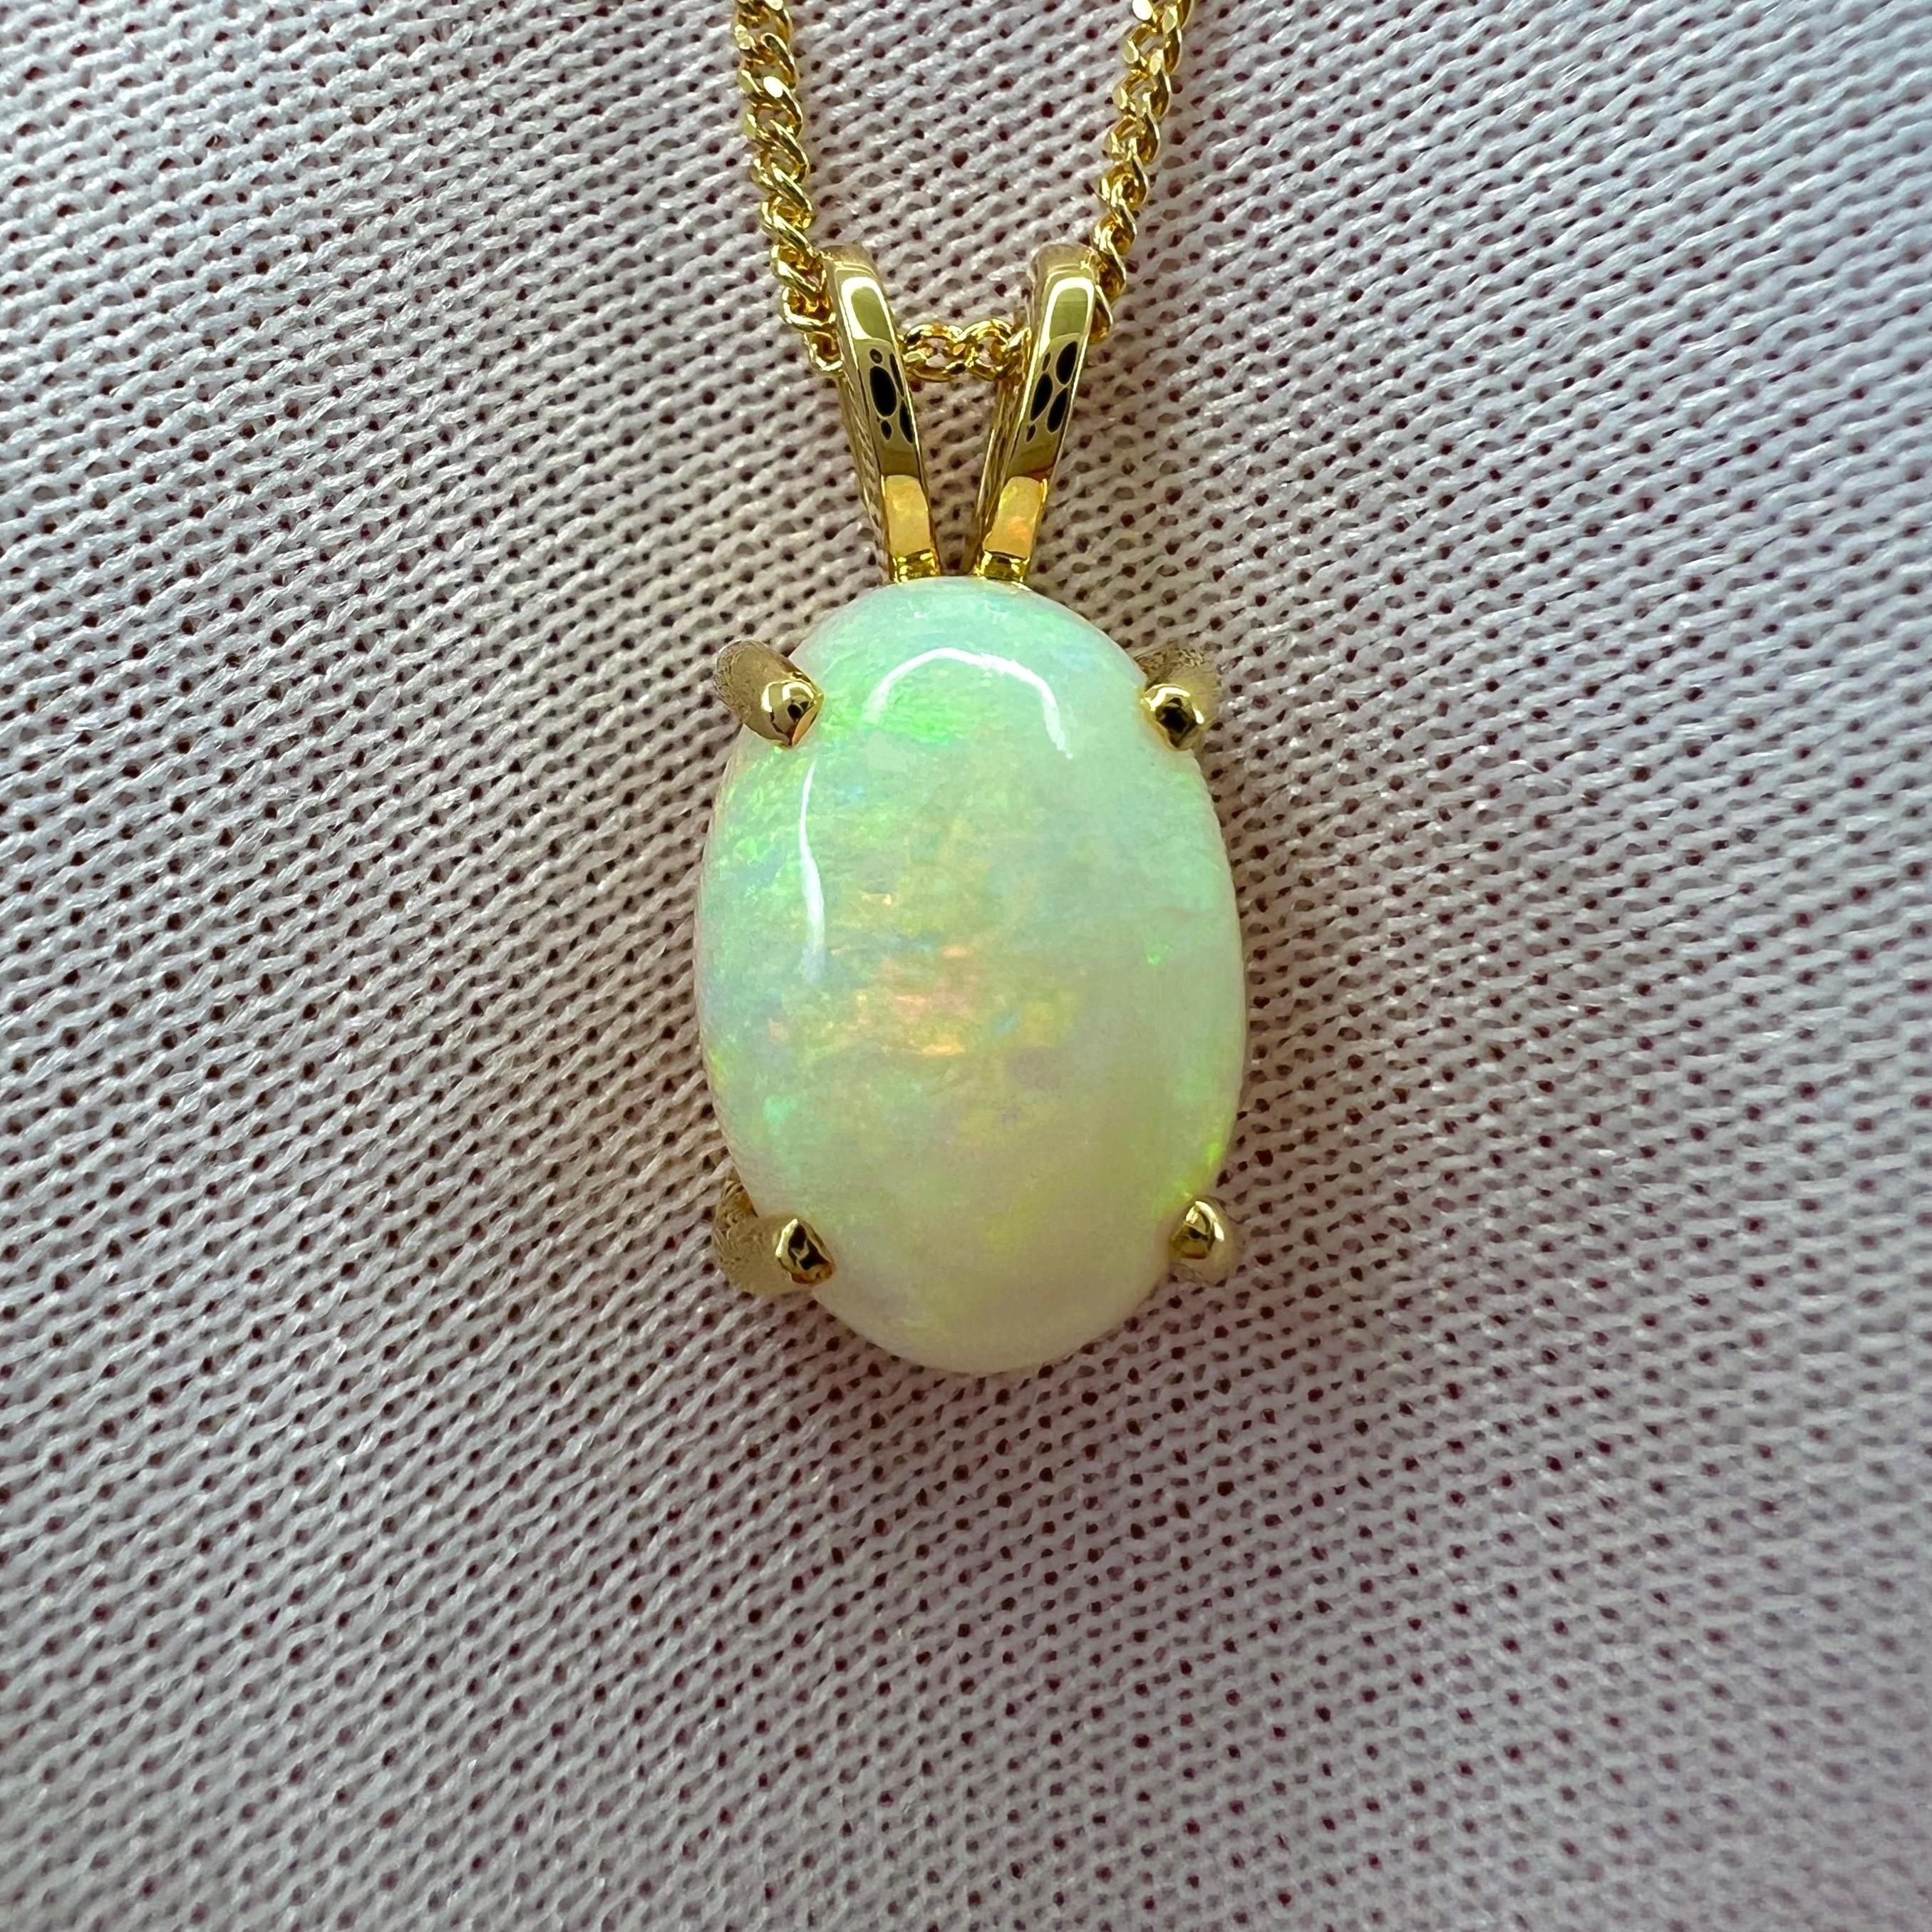 3ct Fine Australian White Opal Oval Cabochon 18k Yellow Gold Pendant Necklace For Sale 6